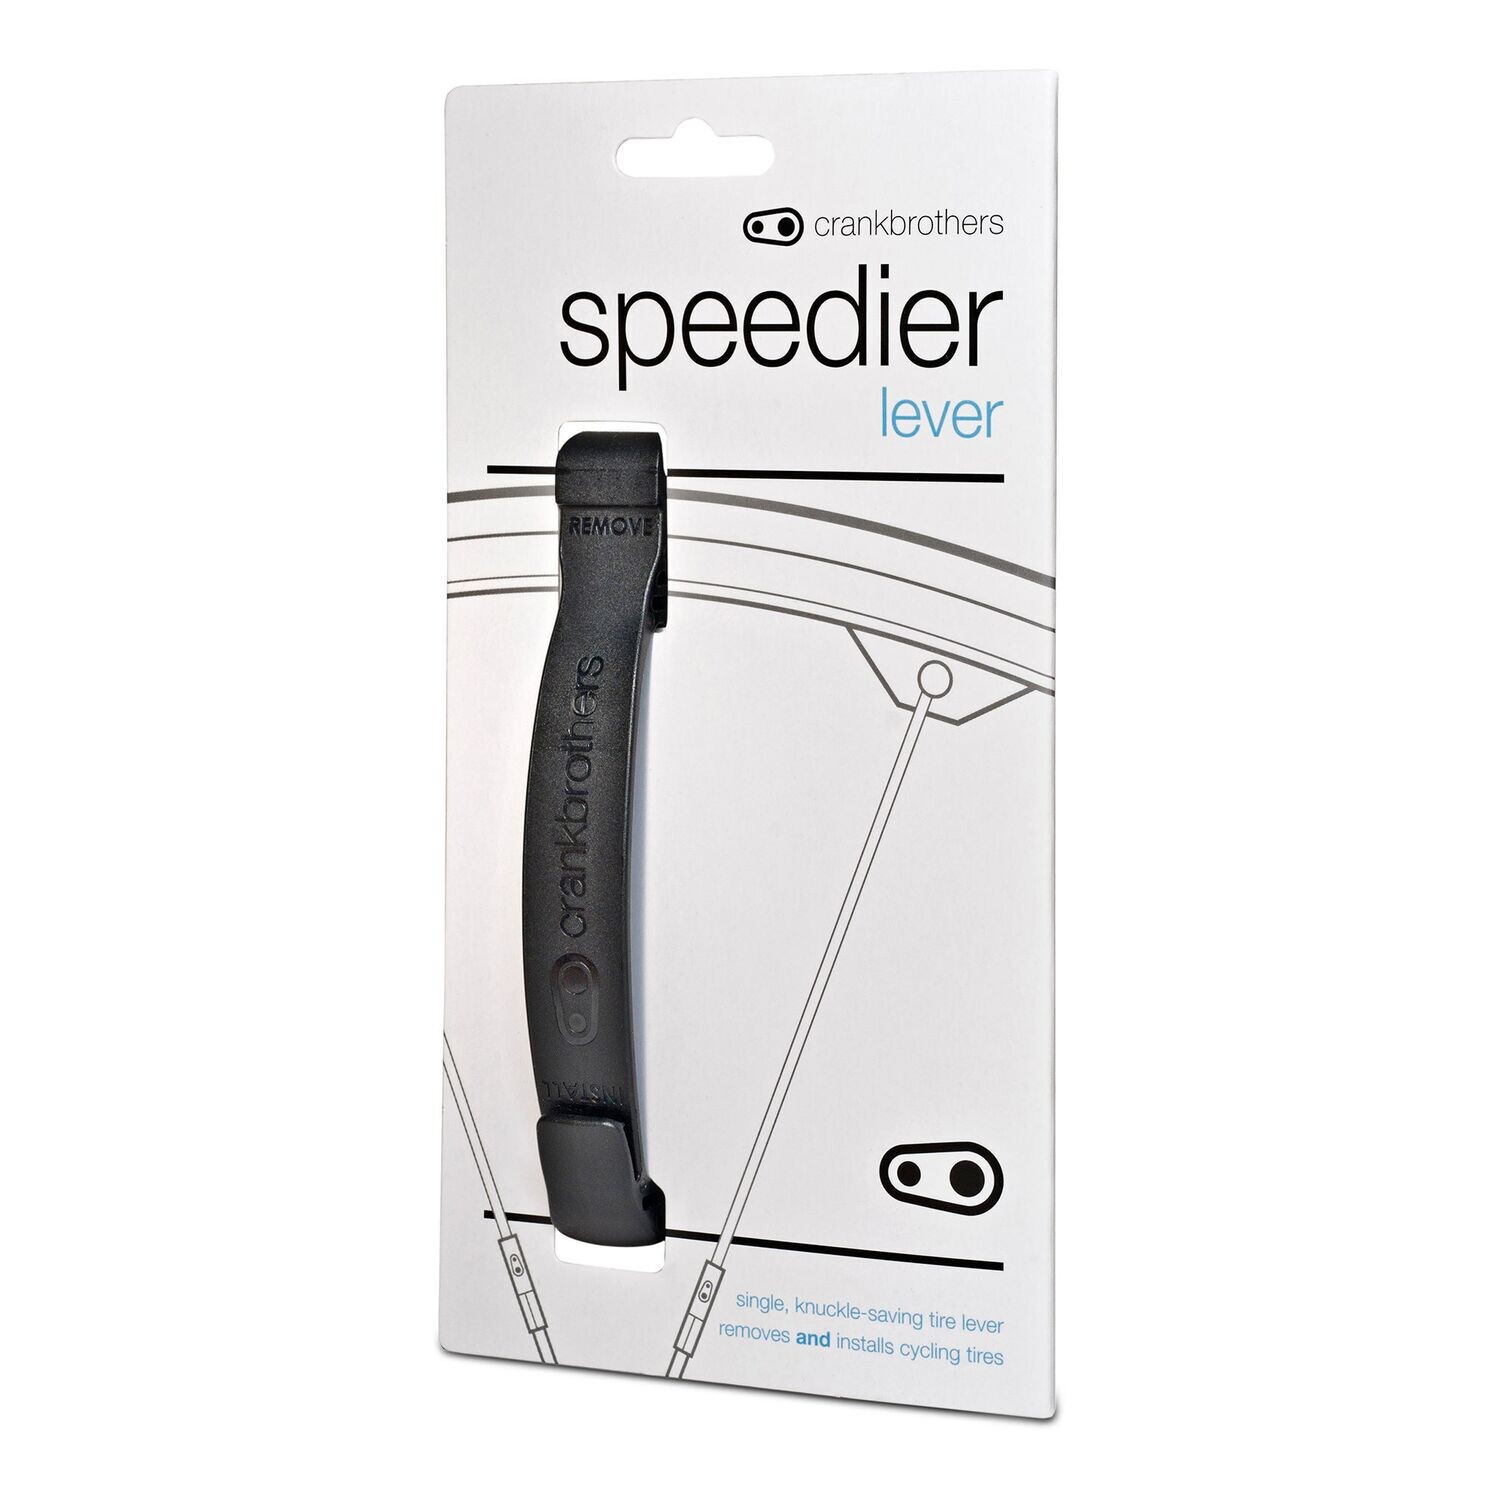 Crank Brothers Speedier Tyre Lever Black Friday Special